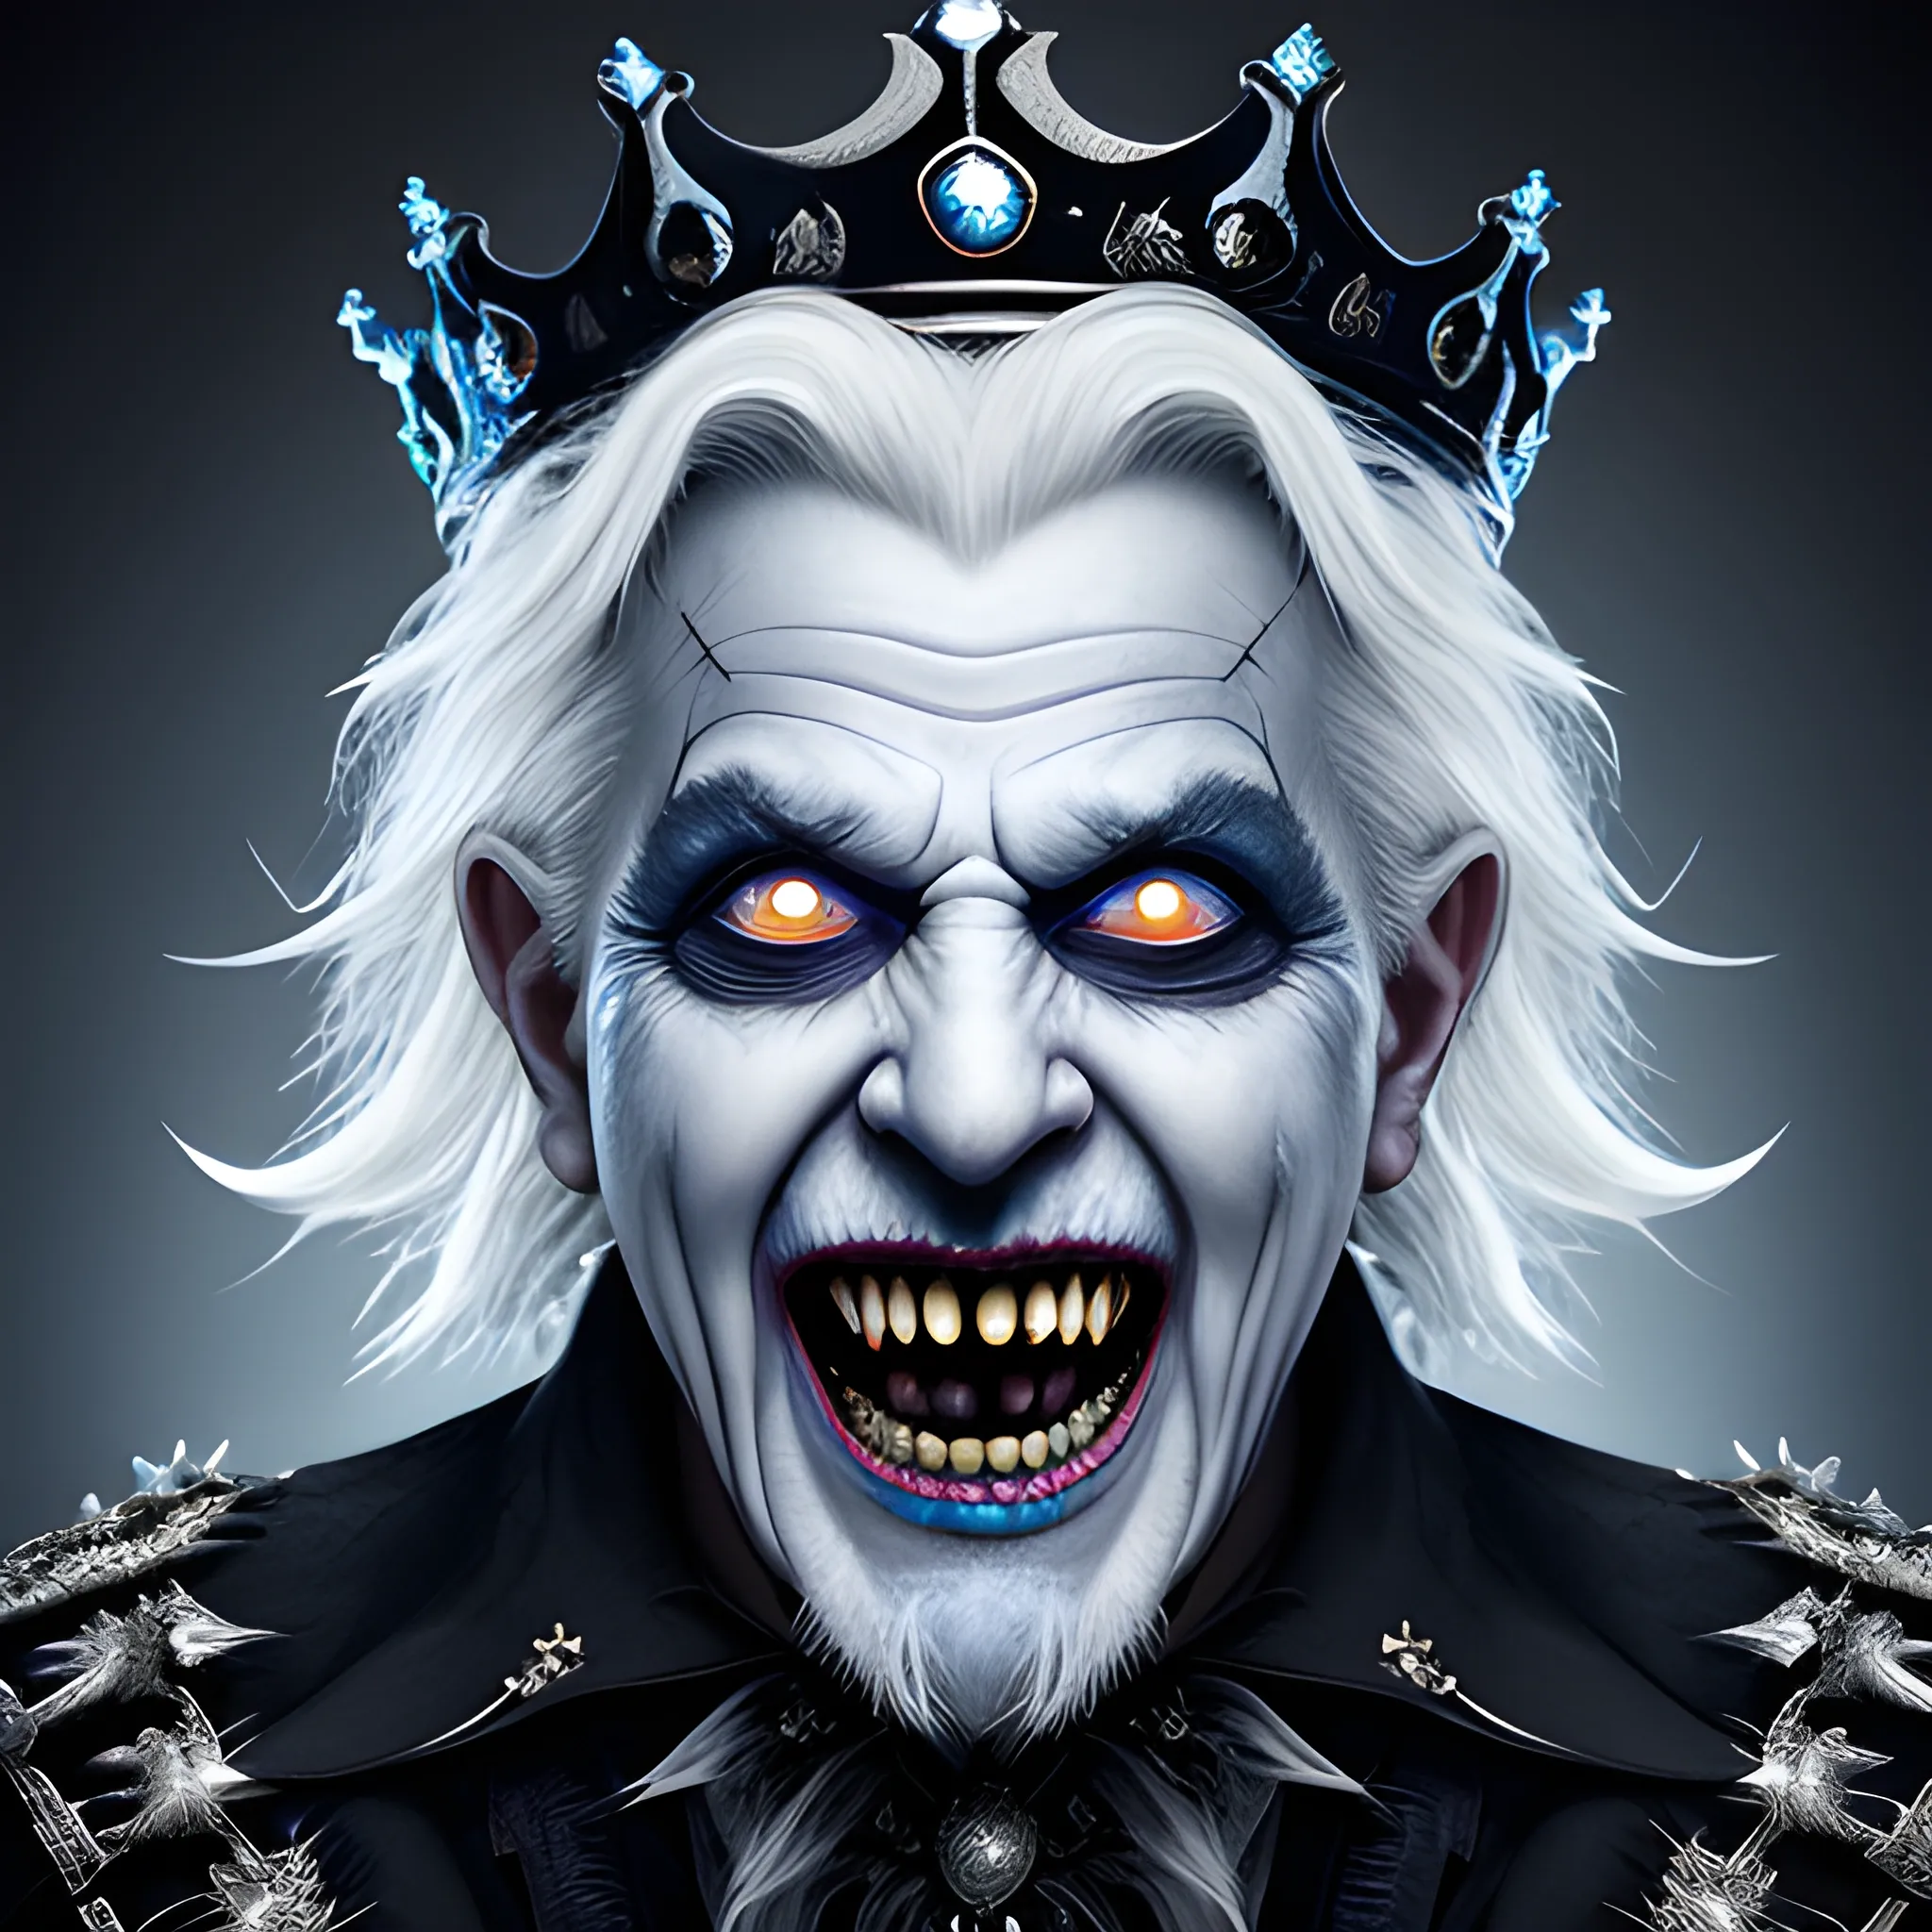 photorealistic image of the elderly king of ghosts screaming with a black crown, full body, ominous smile, dimmed lighting, blue painted hair, white makeup, evil grin, bokeh lighting